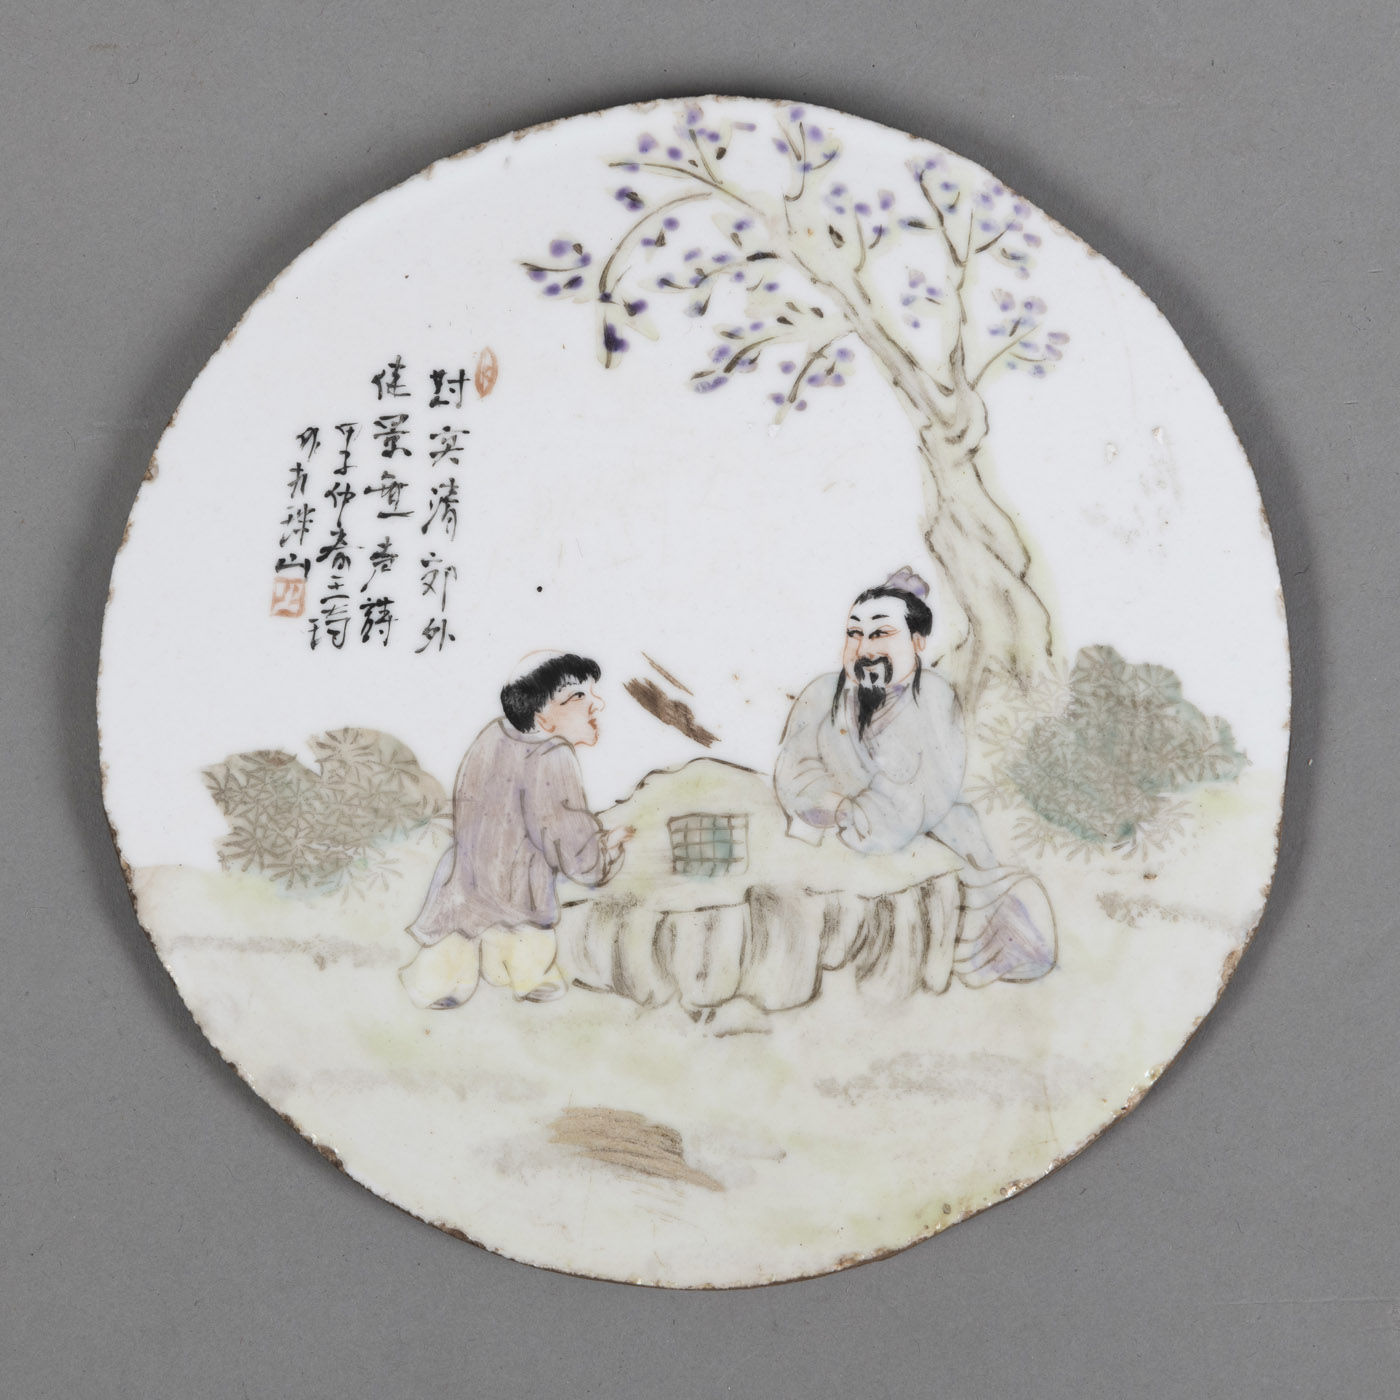 <b>A POLYCHROME PAINTED ROUND PORCELAIN TILE DEPICTING SCHOLARS AT GO GAME</b>